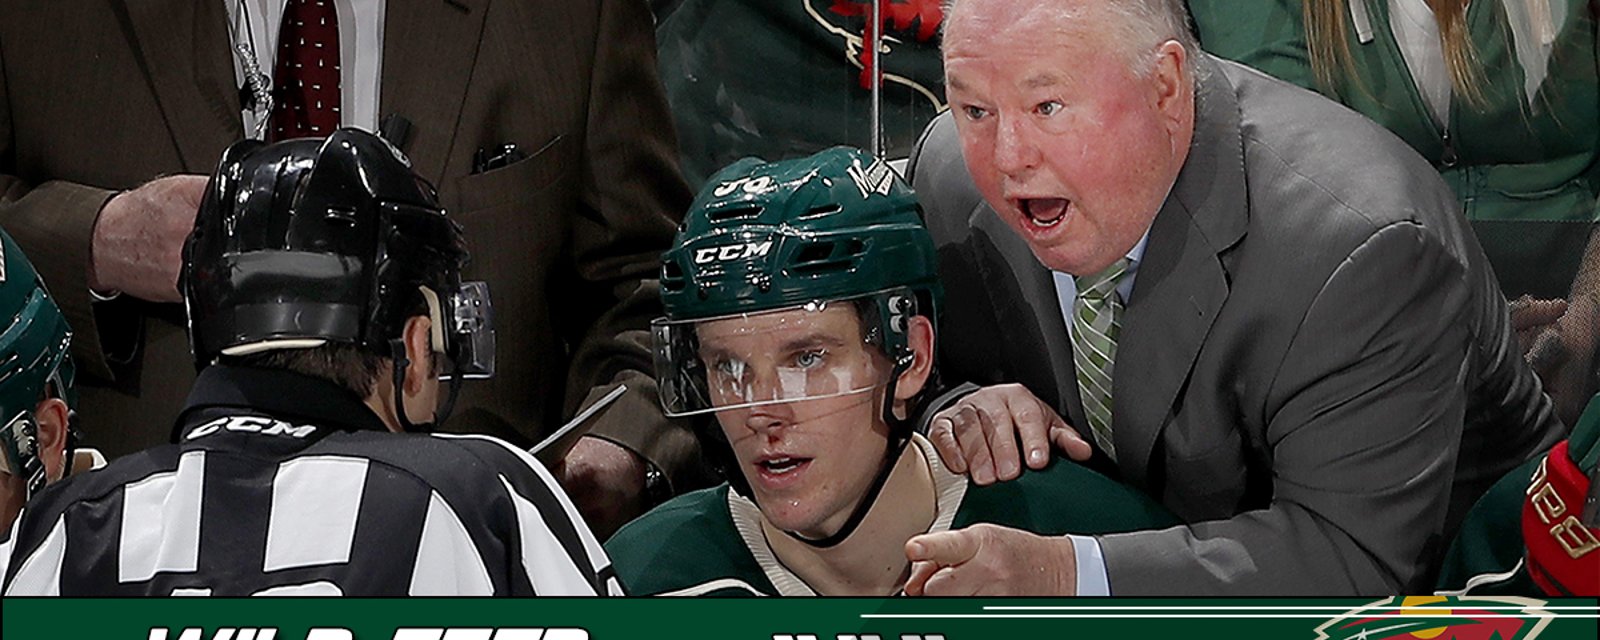 Report: Wild’s Boudreau admits he’s “bored” and “frustrated”